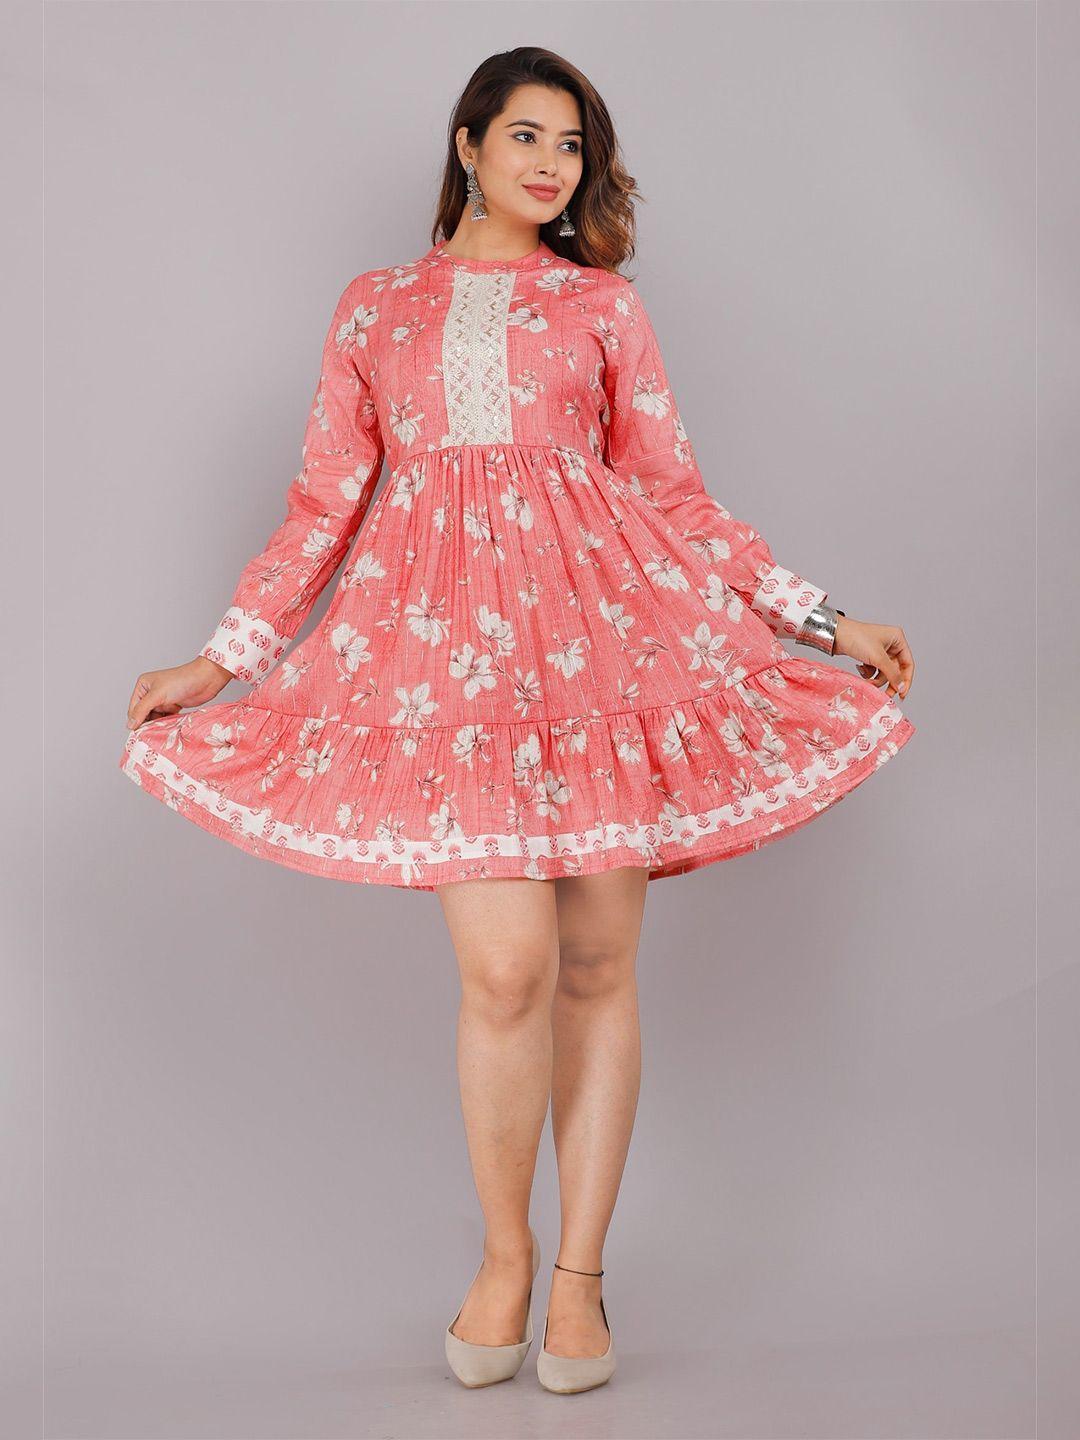 kalini peach-coloured  floral printed fit and flare dress